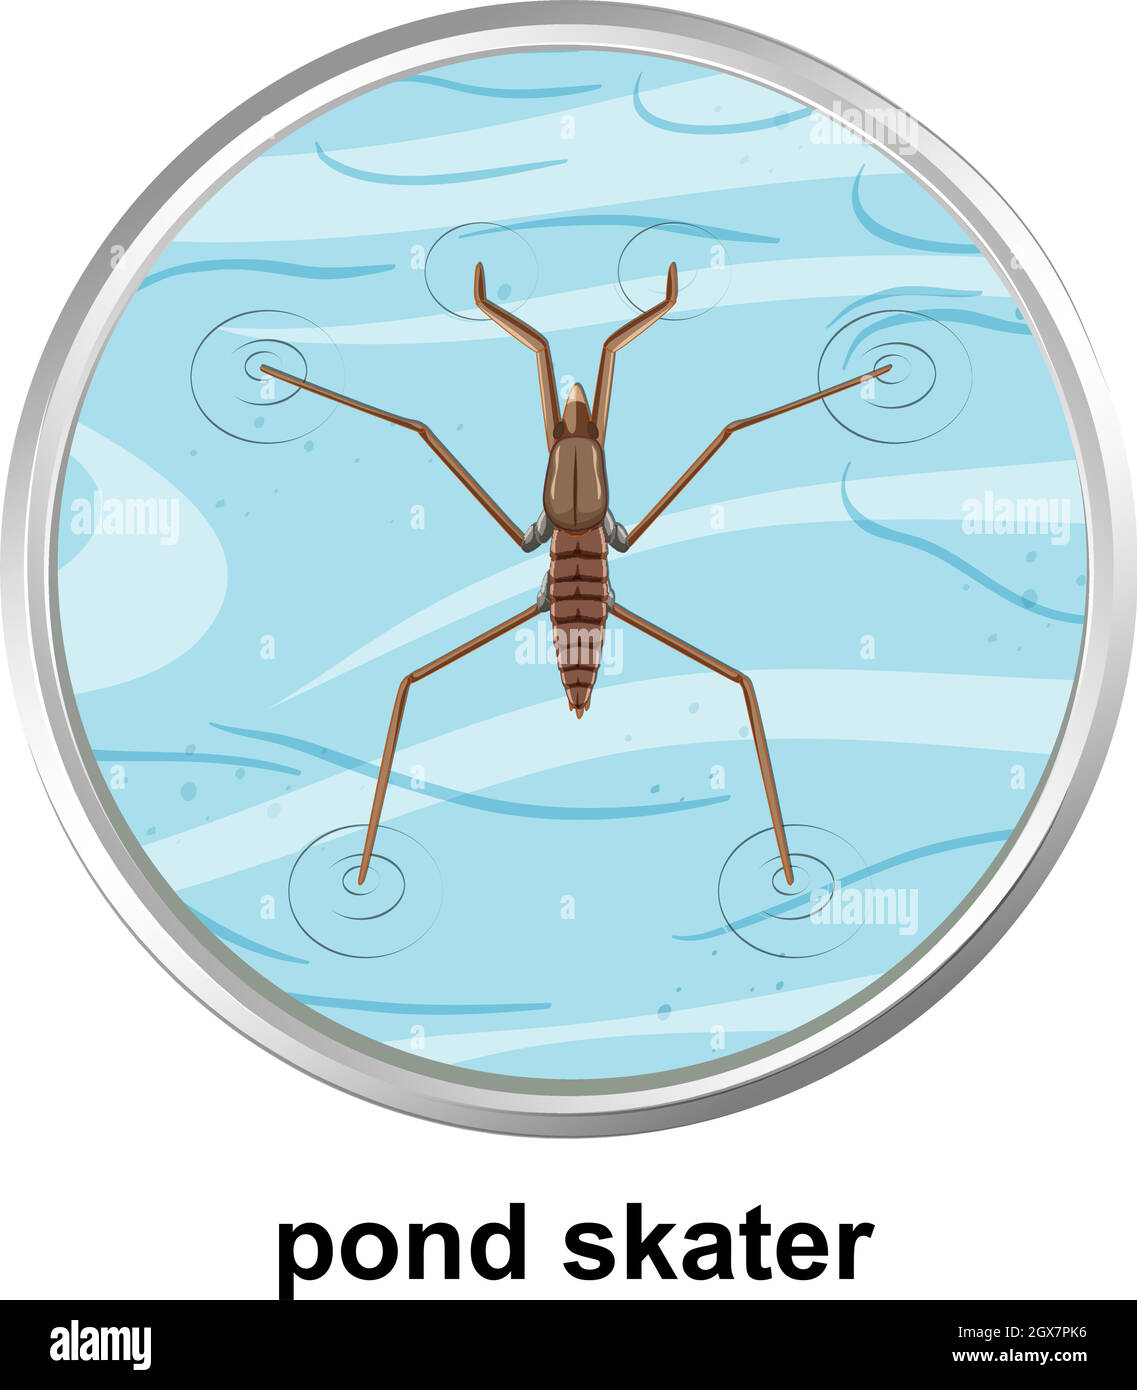 Top view of pond skater on the water Stock Vector